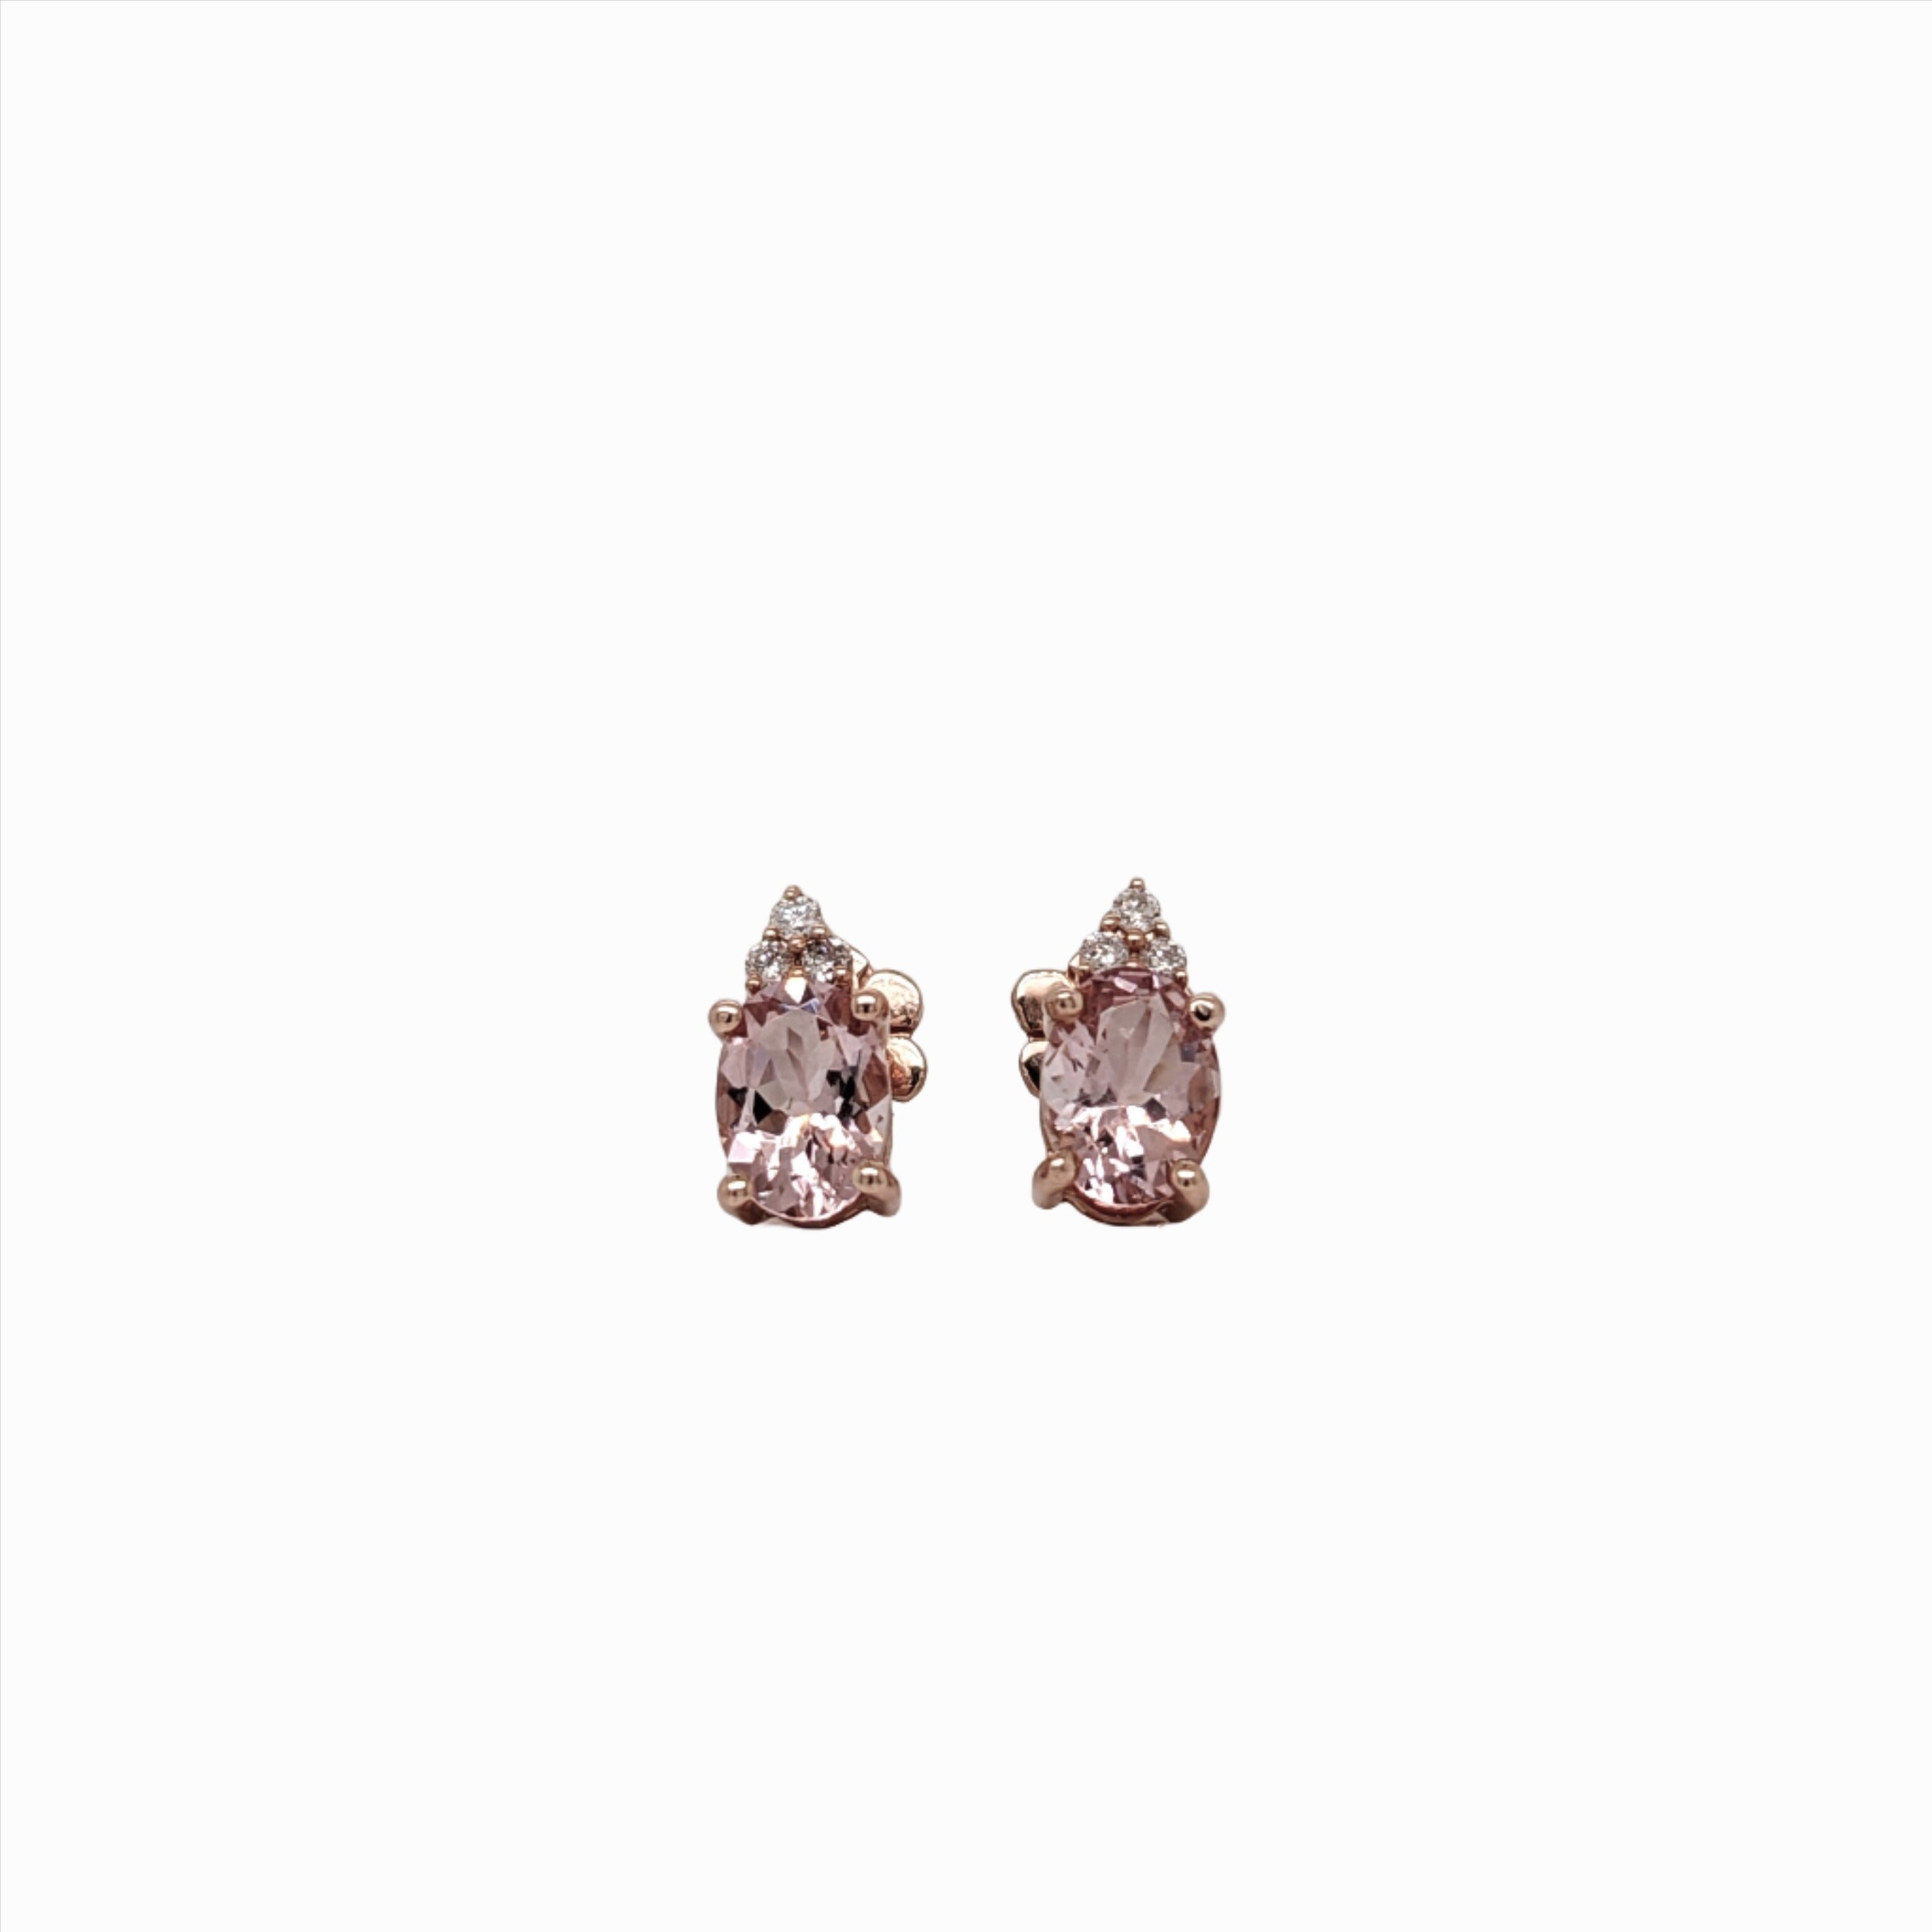 Stud Earrings-Pink Morganite and Diamond Earring Studs in Solid 14K Rose Gold | Oval 7x5mm | Pink Gemstone Studs | Daily Wear | Cor de Rosa |Ready to Ship - NNJGemstones